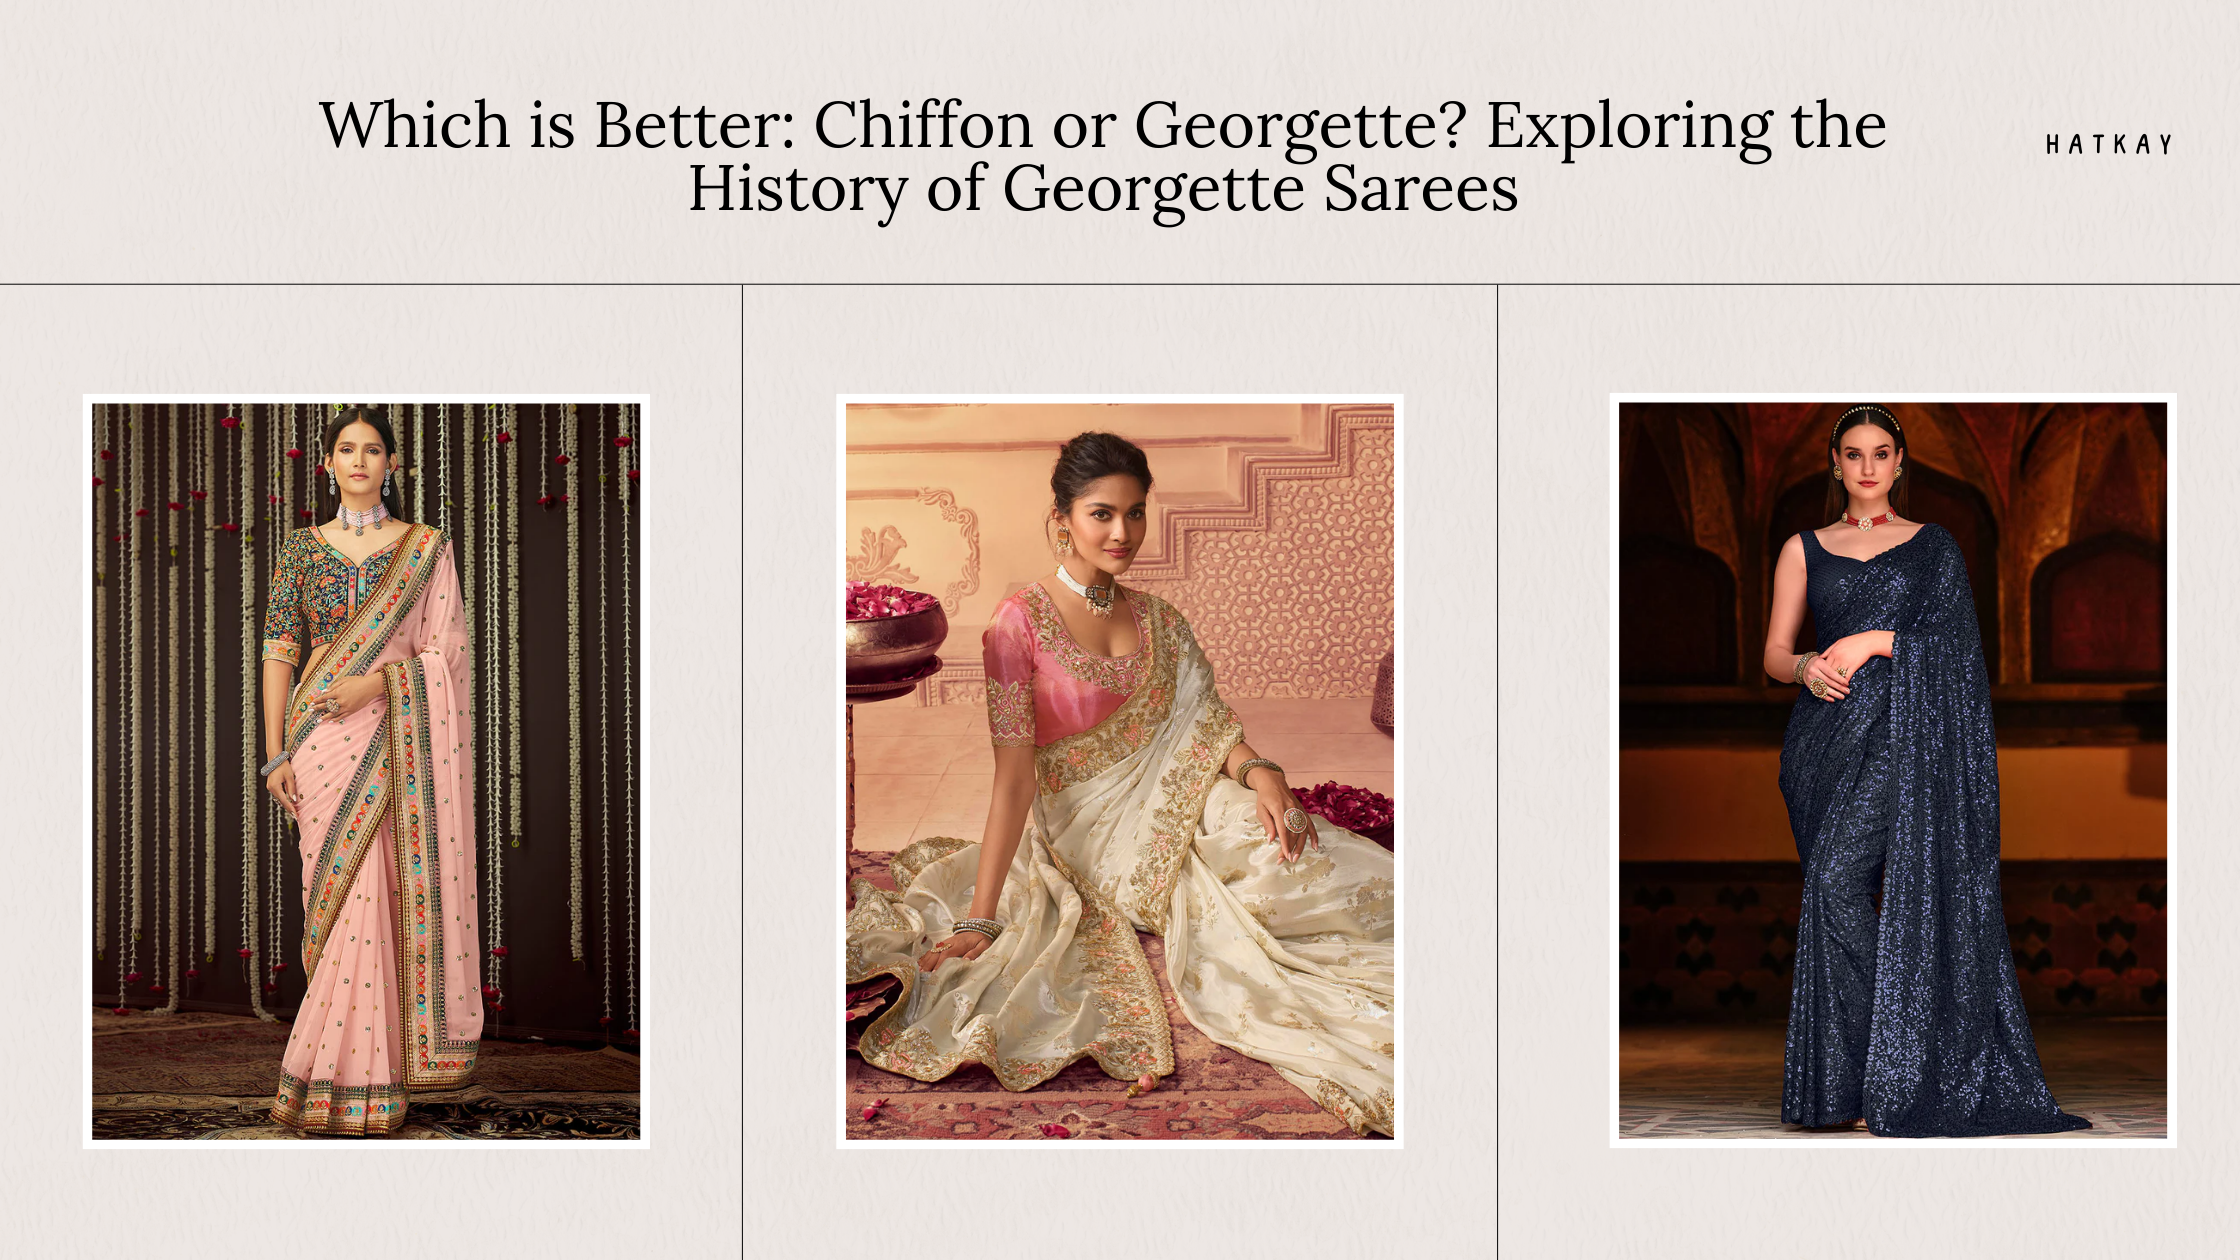 Which is Better: Chiffon or Georgette? Exploring the History of Georgette Sarees